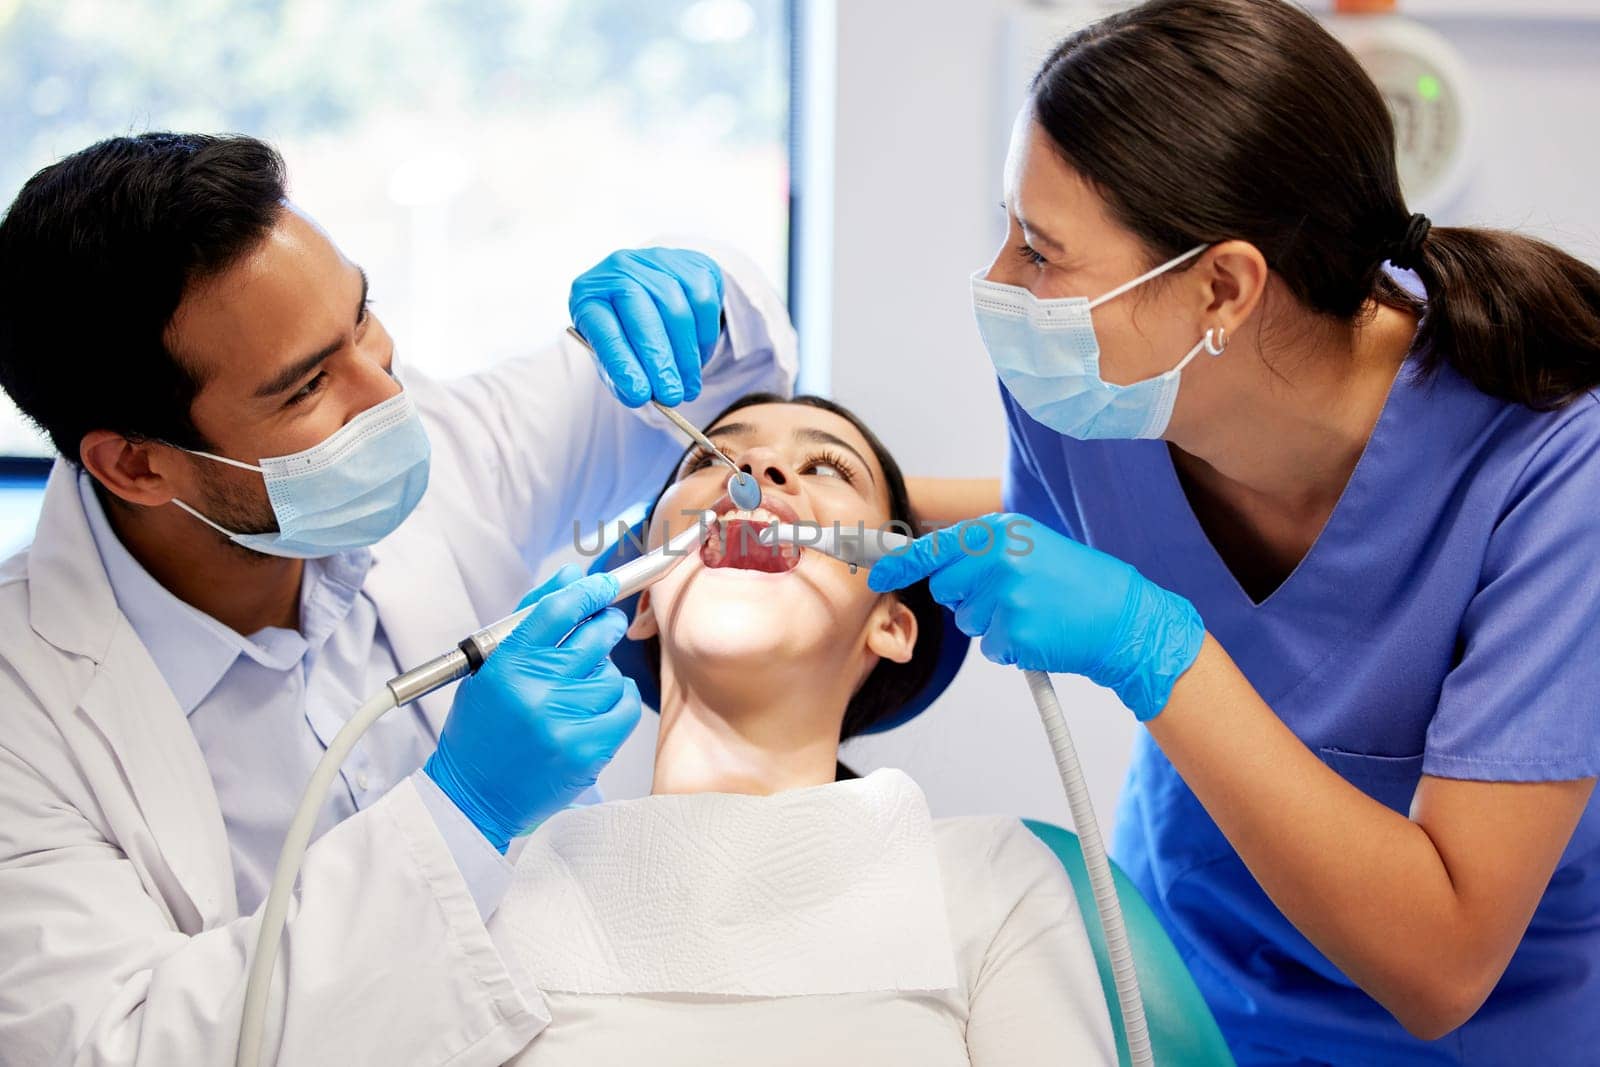 Gentle care in the dentists chair. a young woman having a dental procedure performed on her